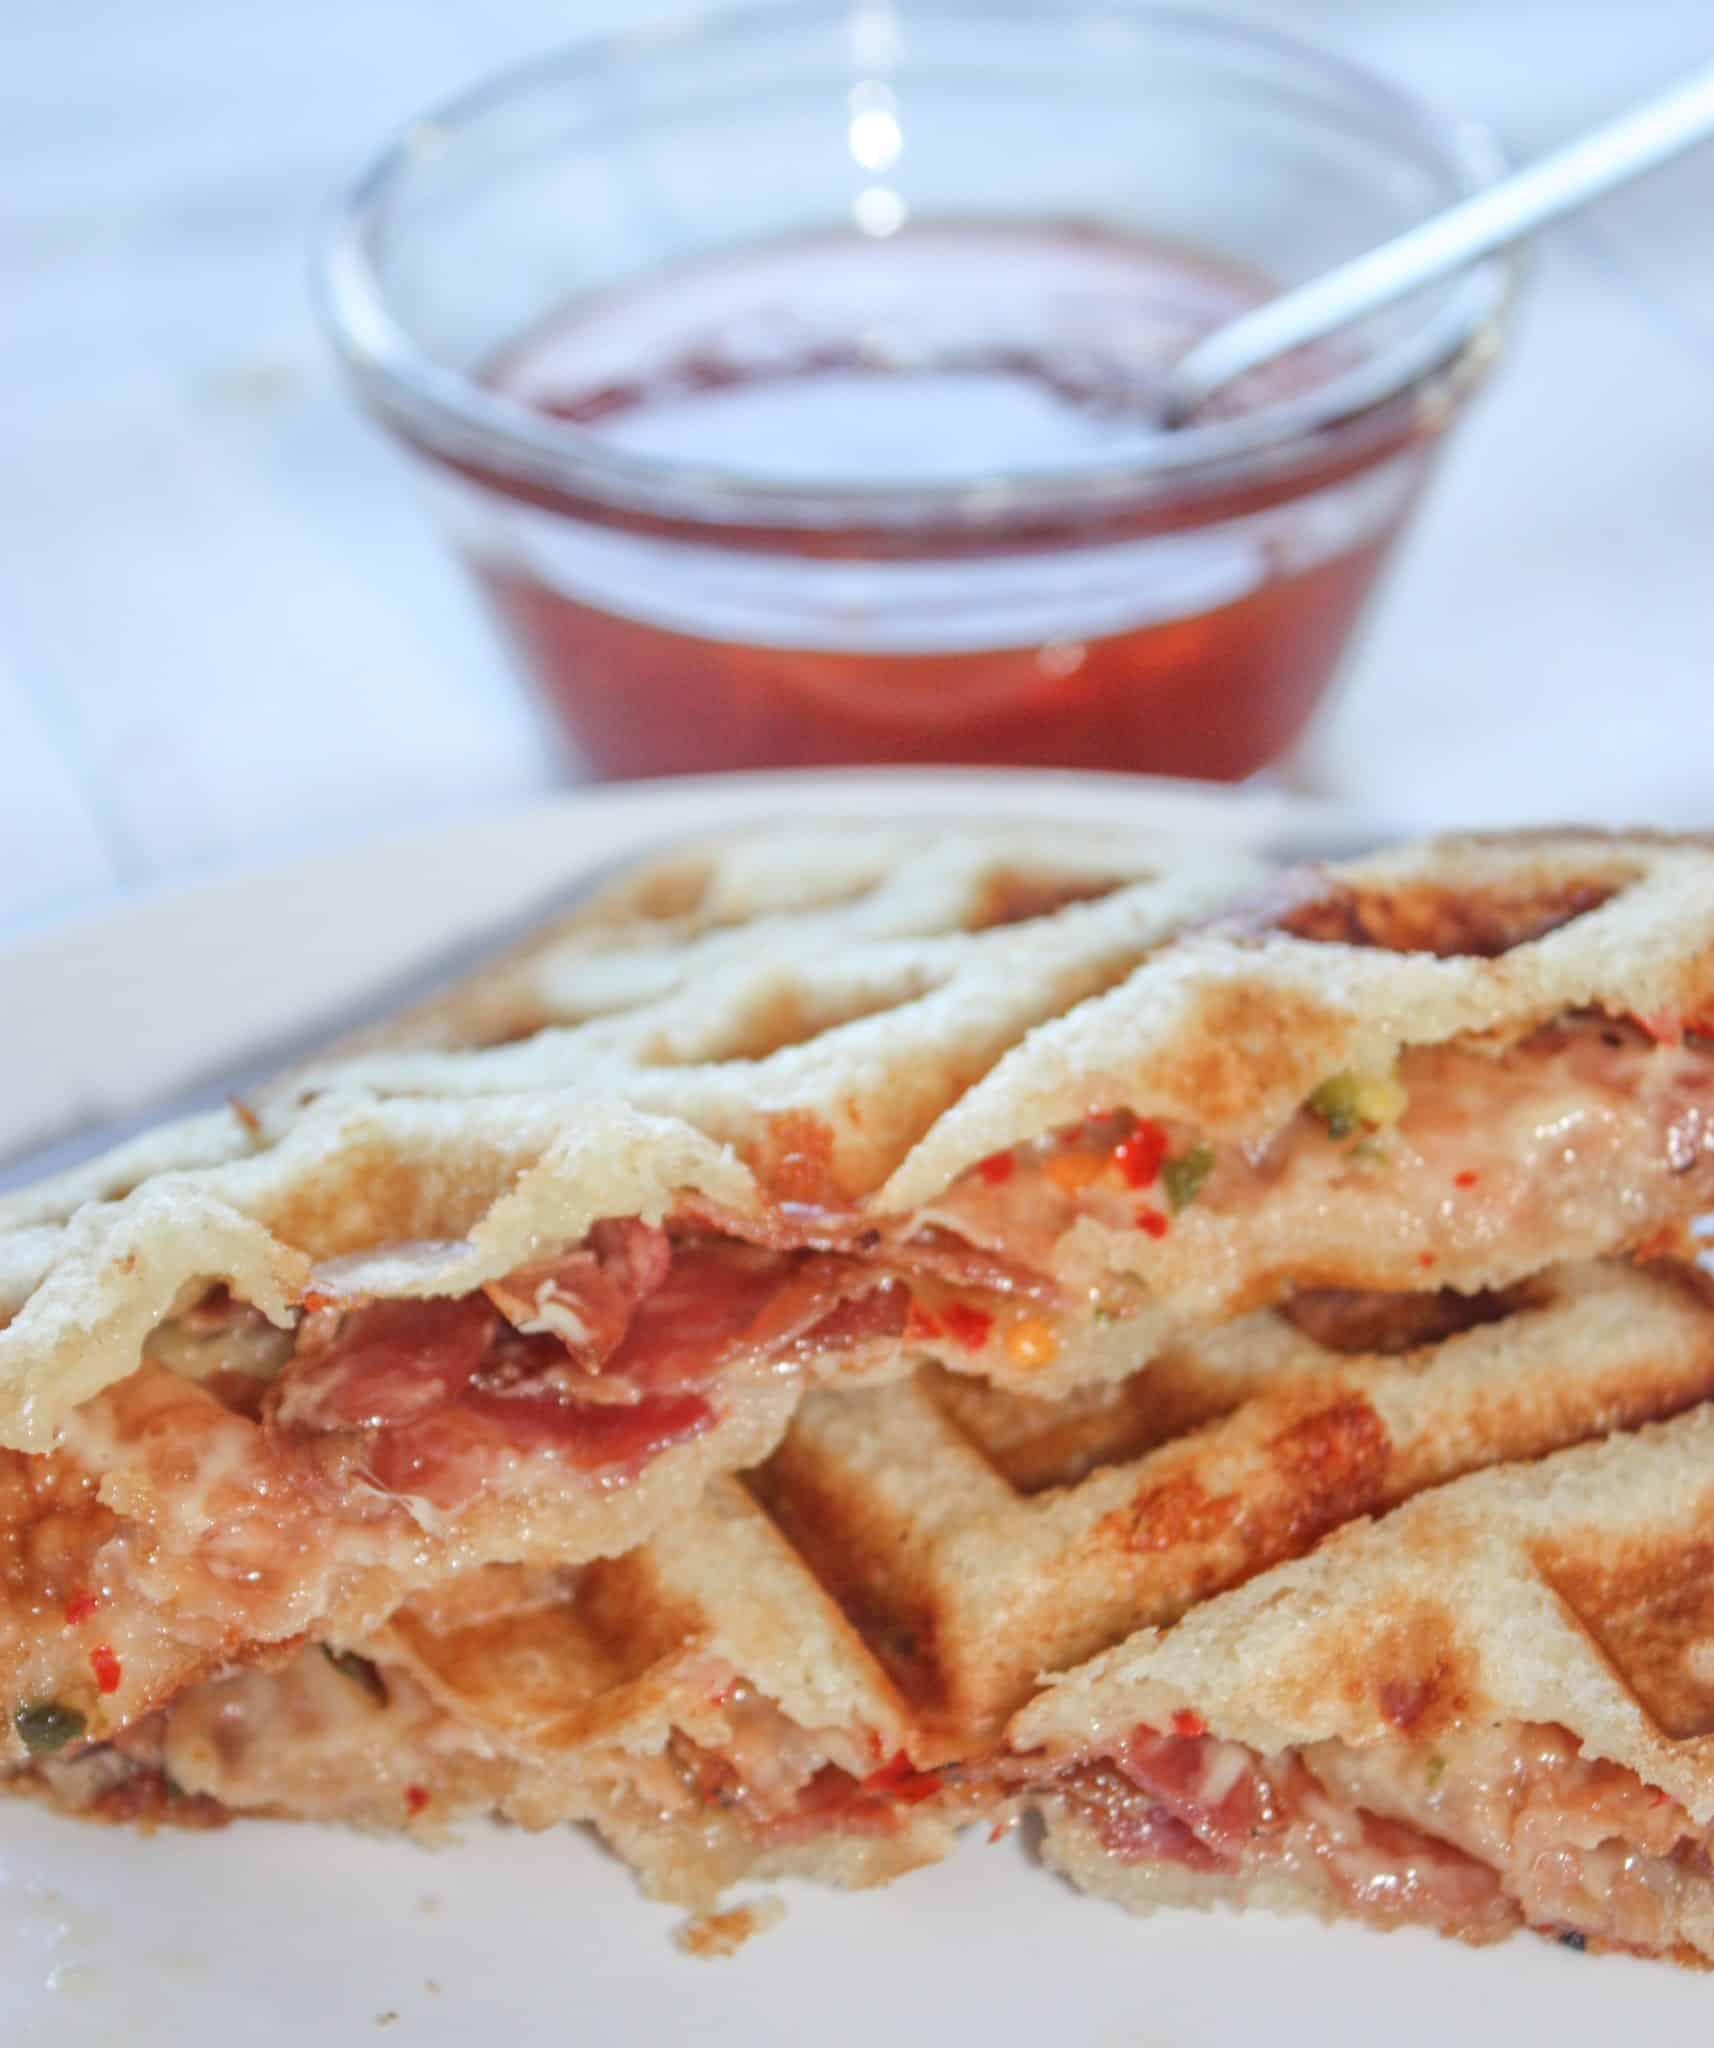 Peppery mozzarella cheese, topped with bacon slices, layered between slices of gluten free bread pressed in the waffle iron to create an appetizing delight.  Spicy Waffled Grilled Cheese with Bacon wakes up the taste buds with a burst of heat.  